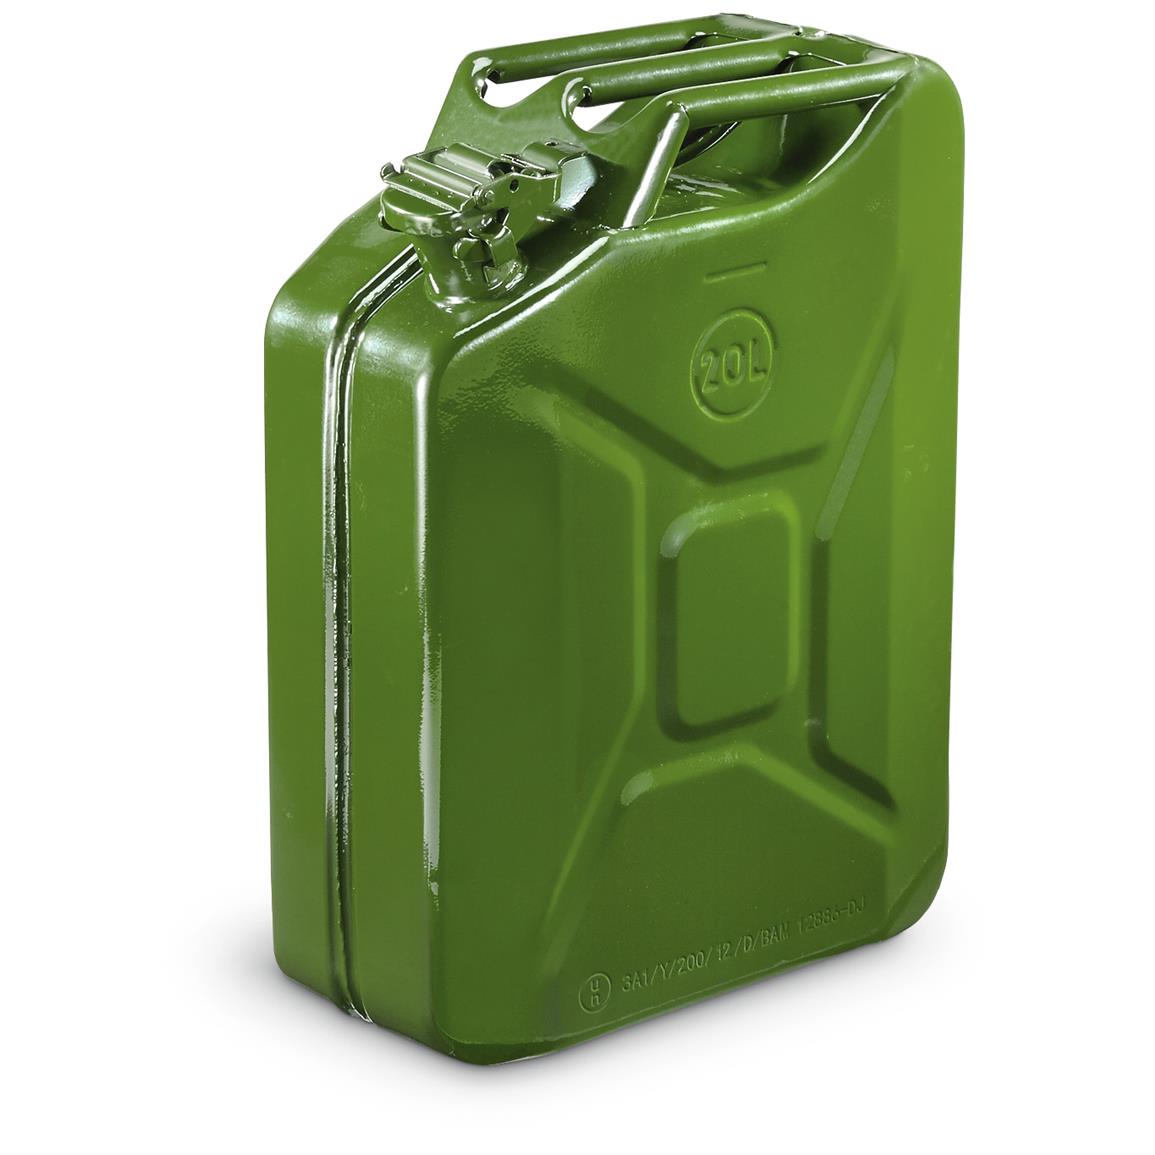 NATO-Style 20-Liter Jerry Can - 637591, Jerry Cans at Sportsman's Guide